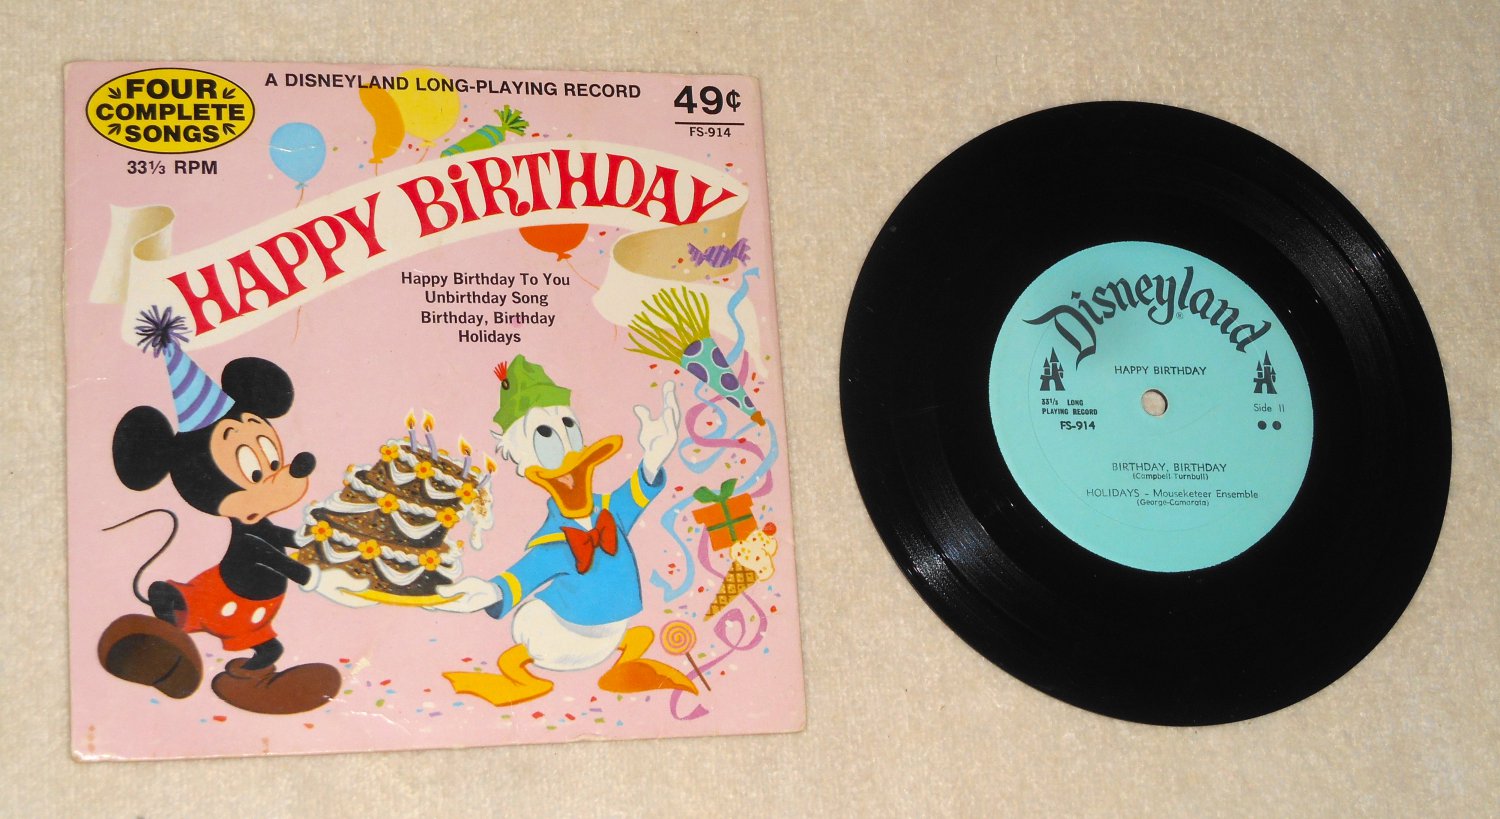 Happy Birthday Disneyland Long Playing Record With Sleeve FS-914 Four Complete Songs 1972